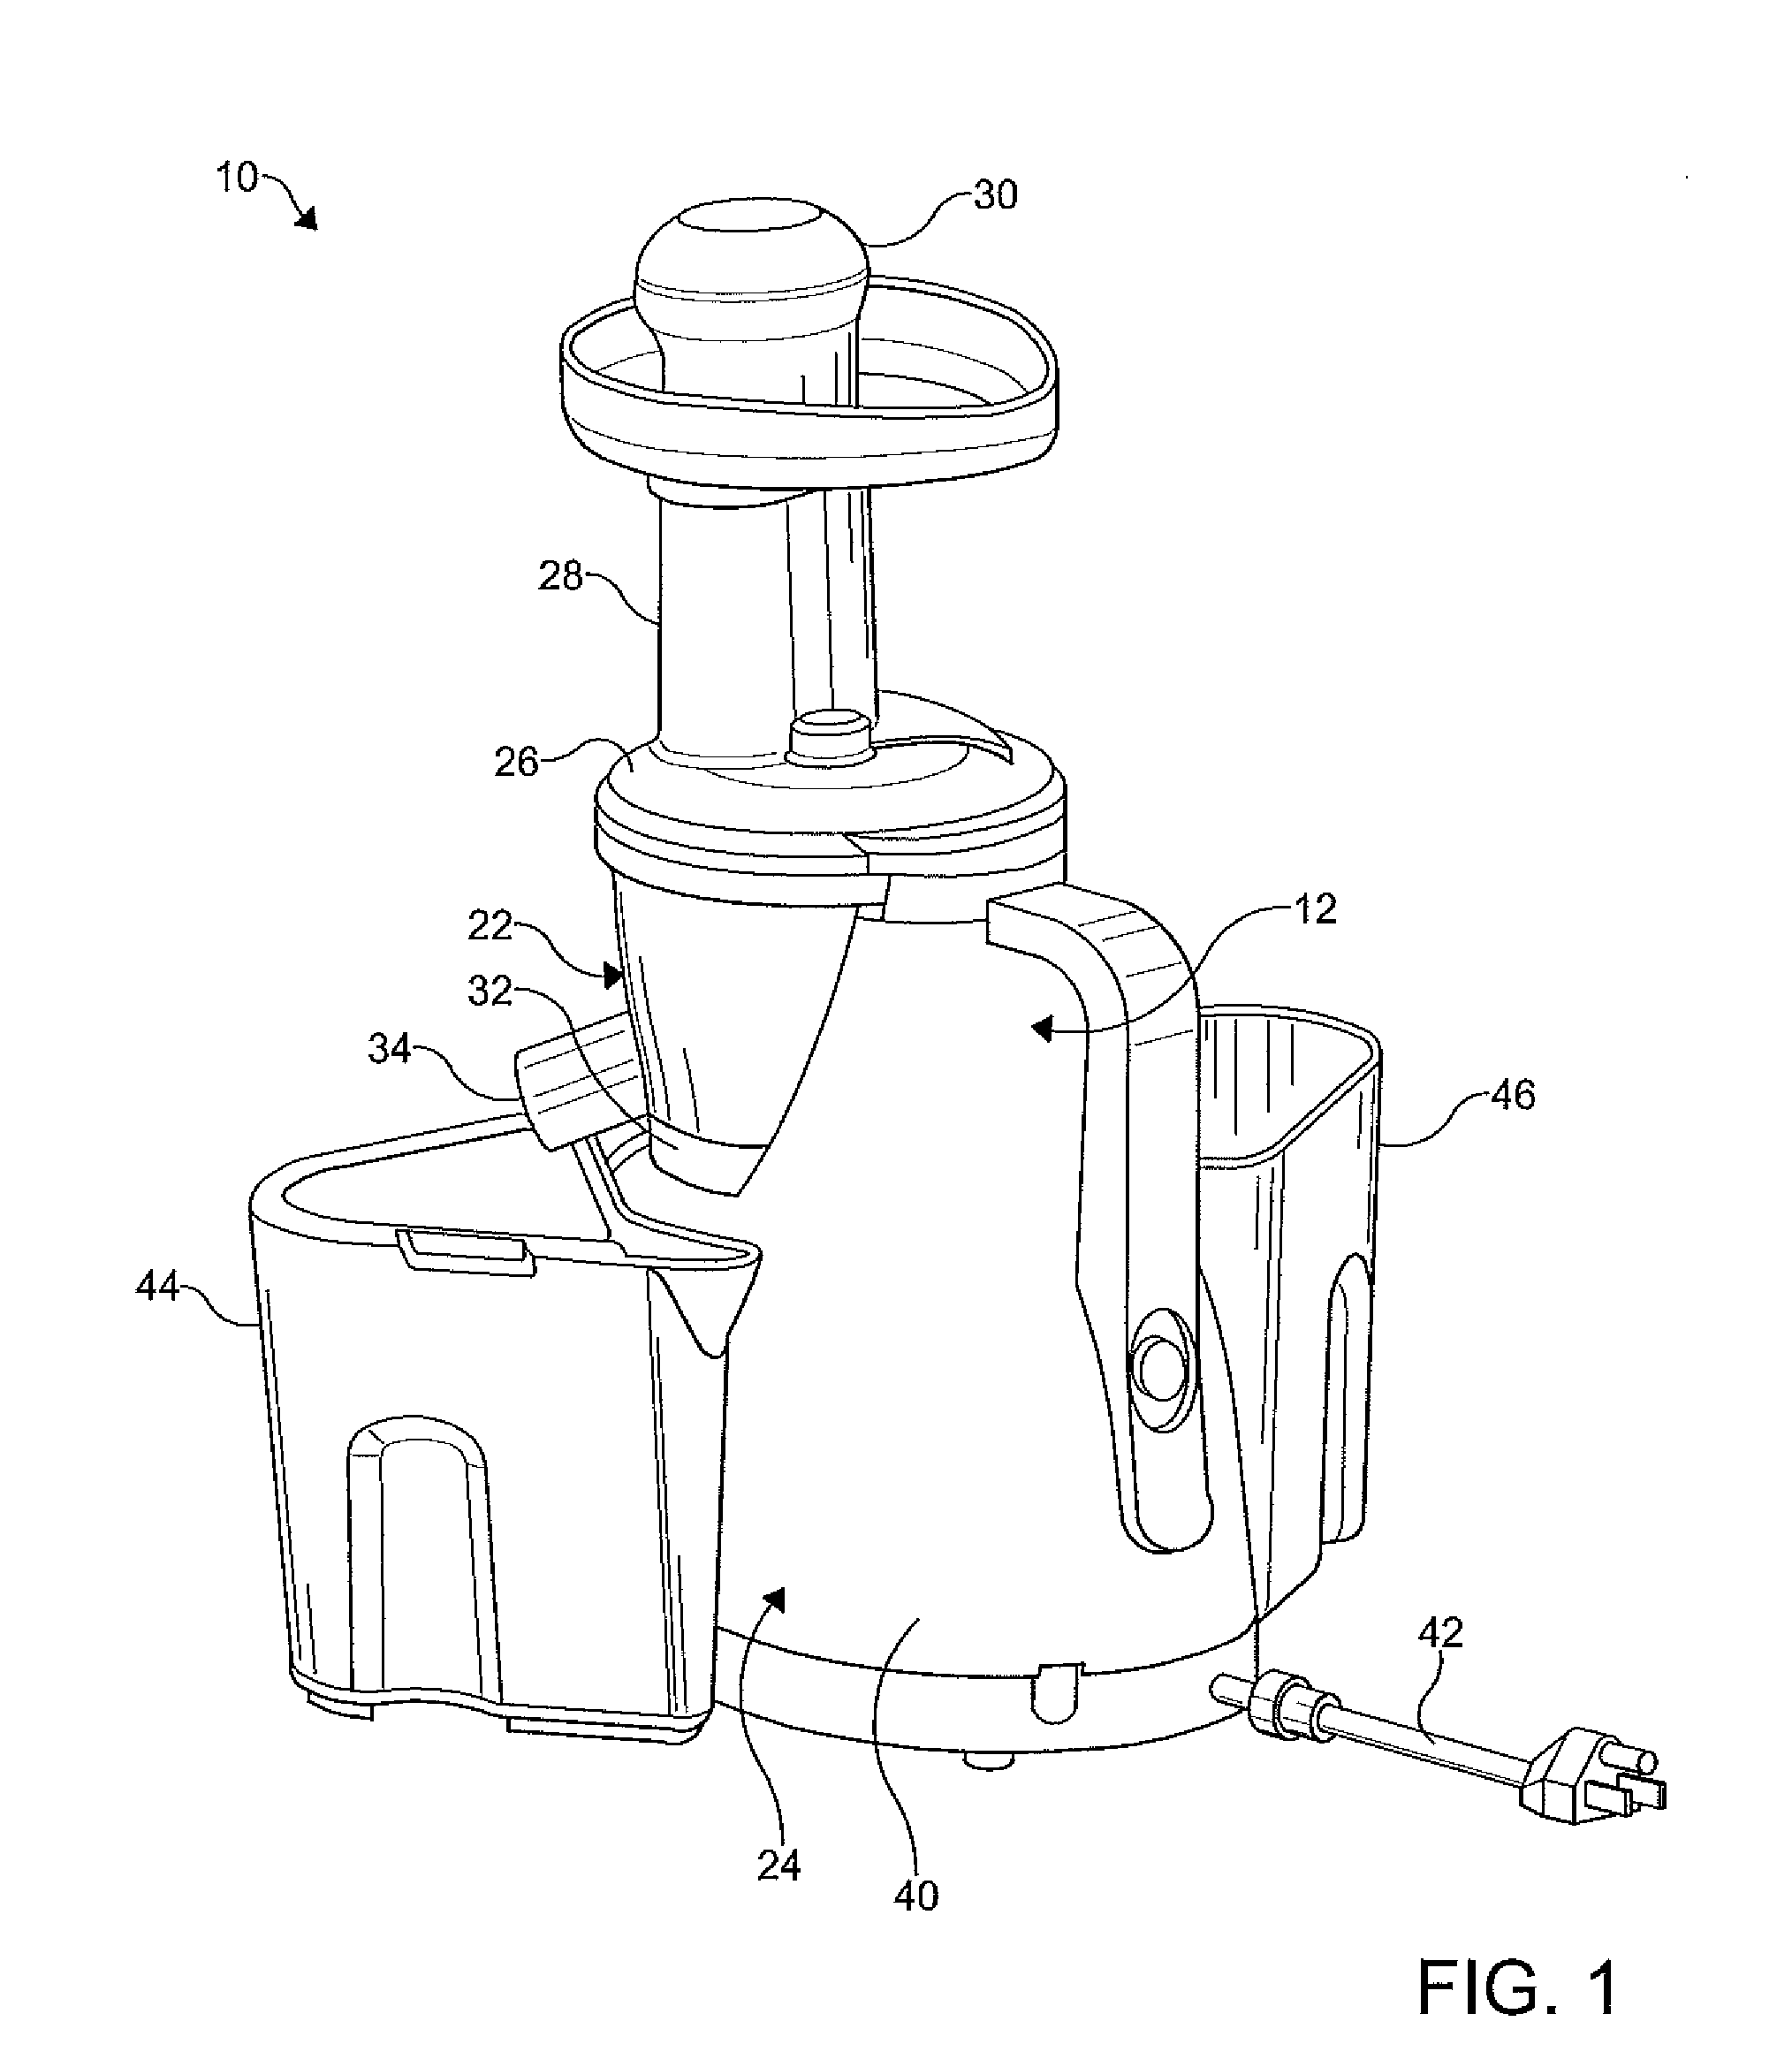 Vertical juicer with compression strainer device